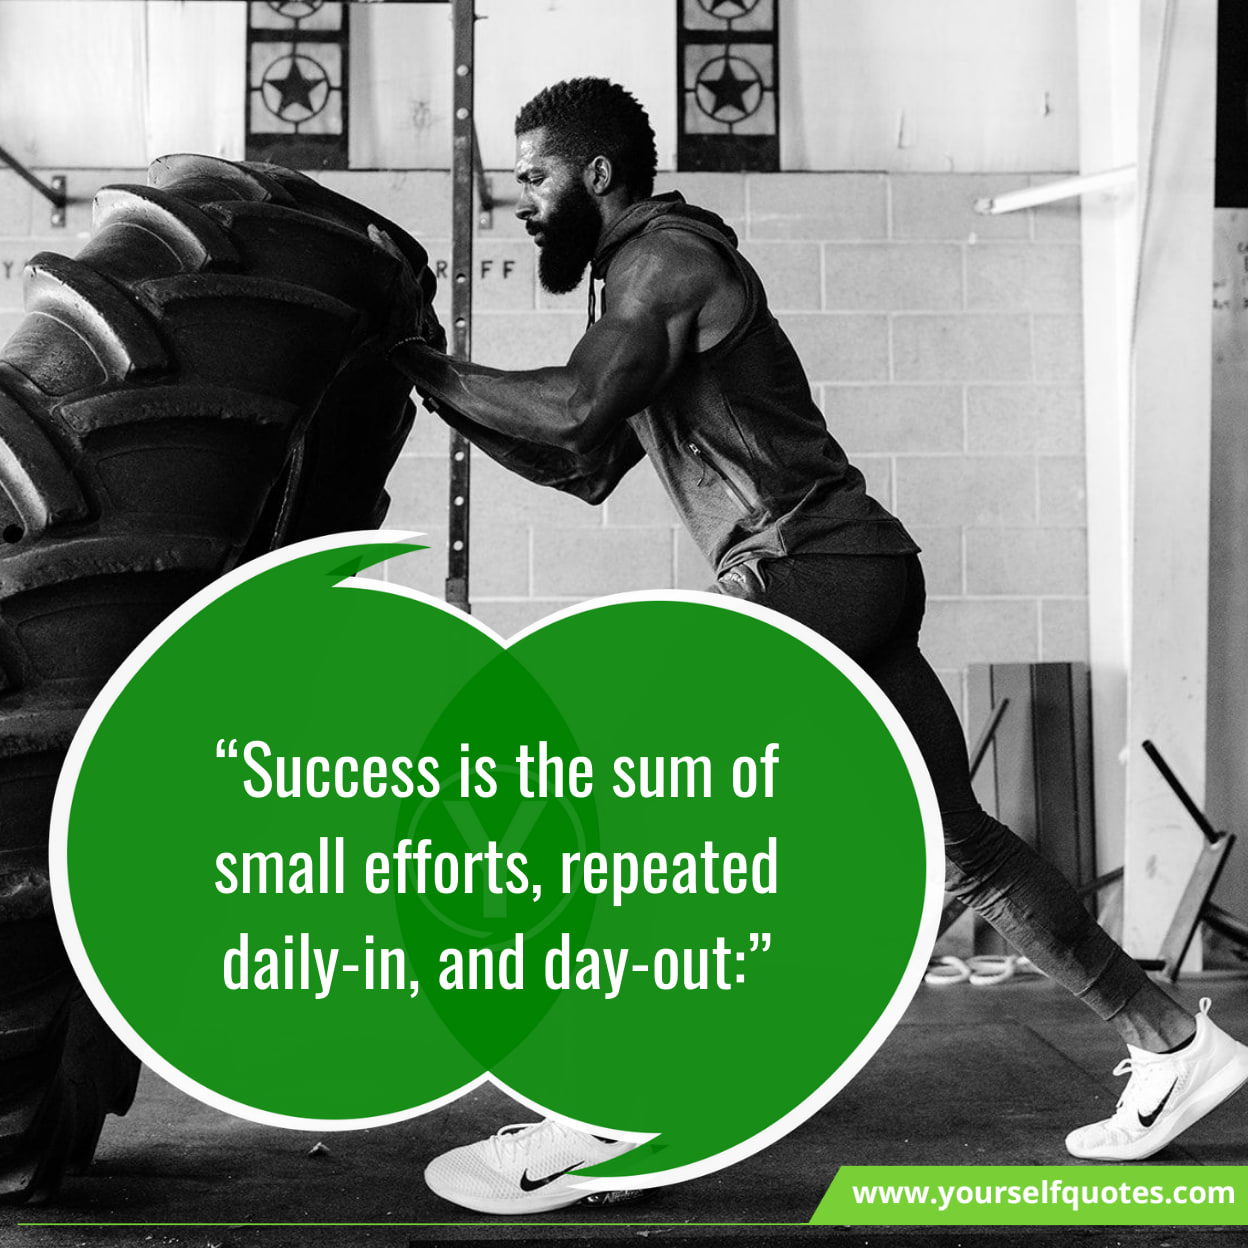 Motivational Monday Quotes On Success